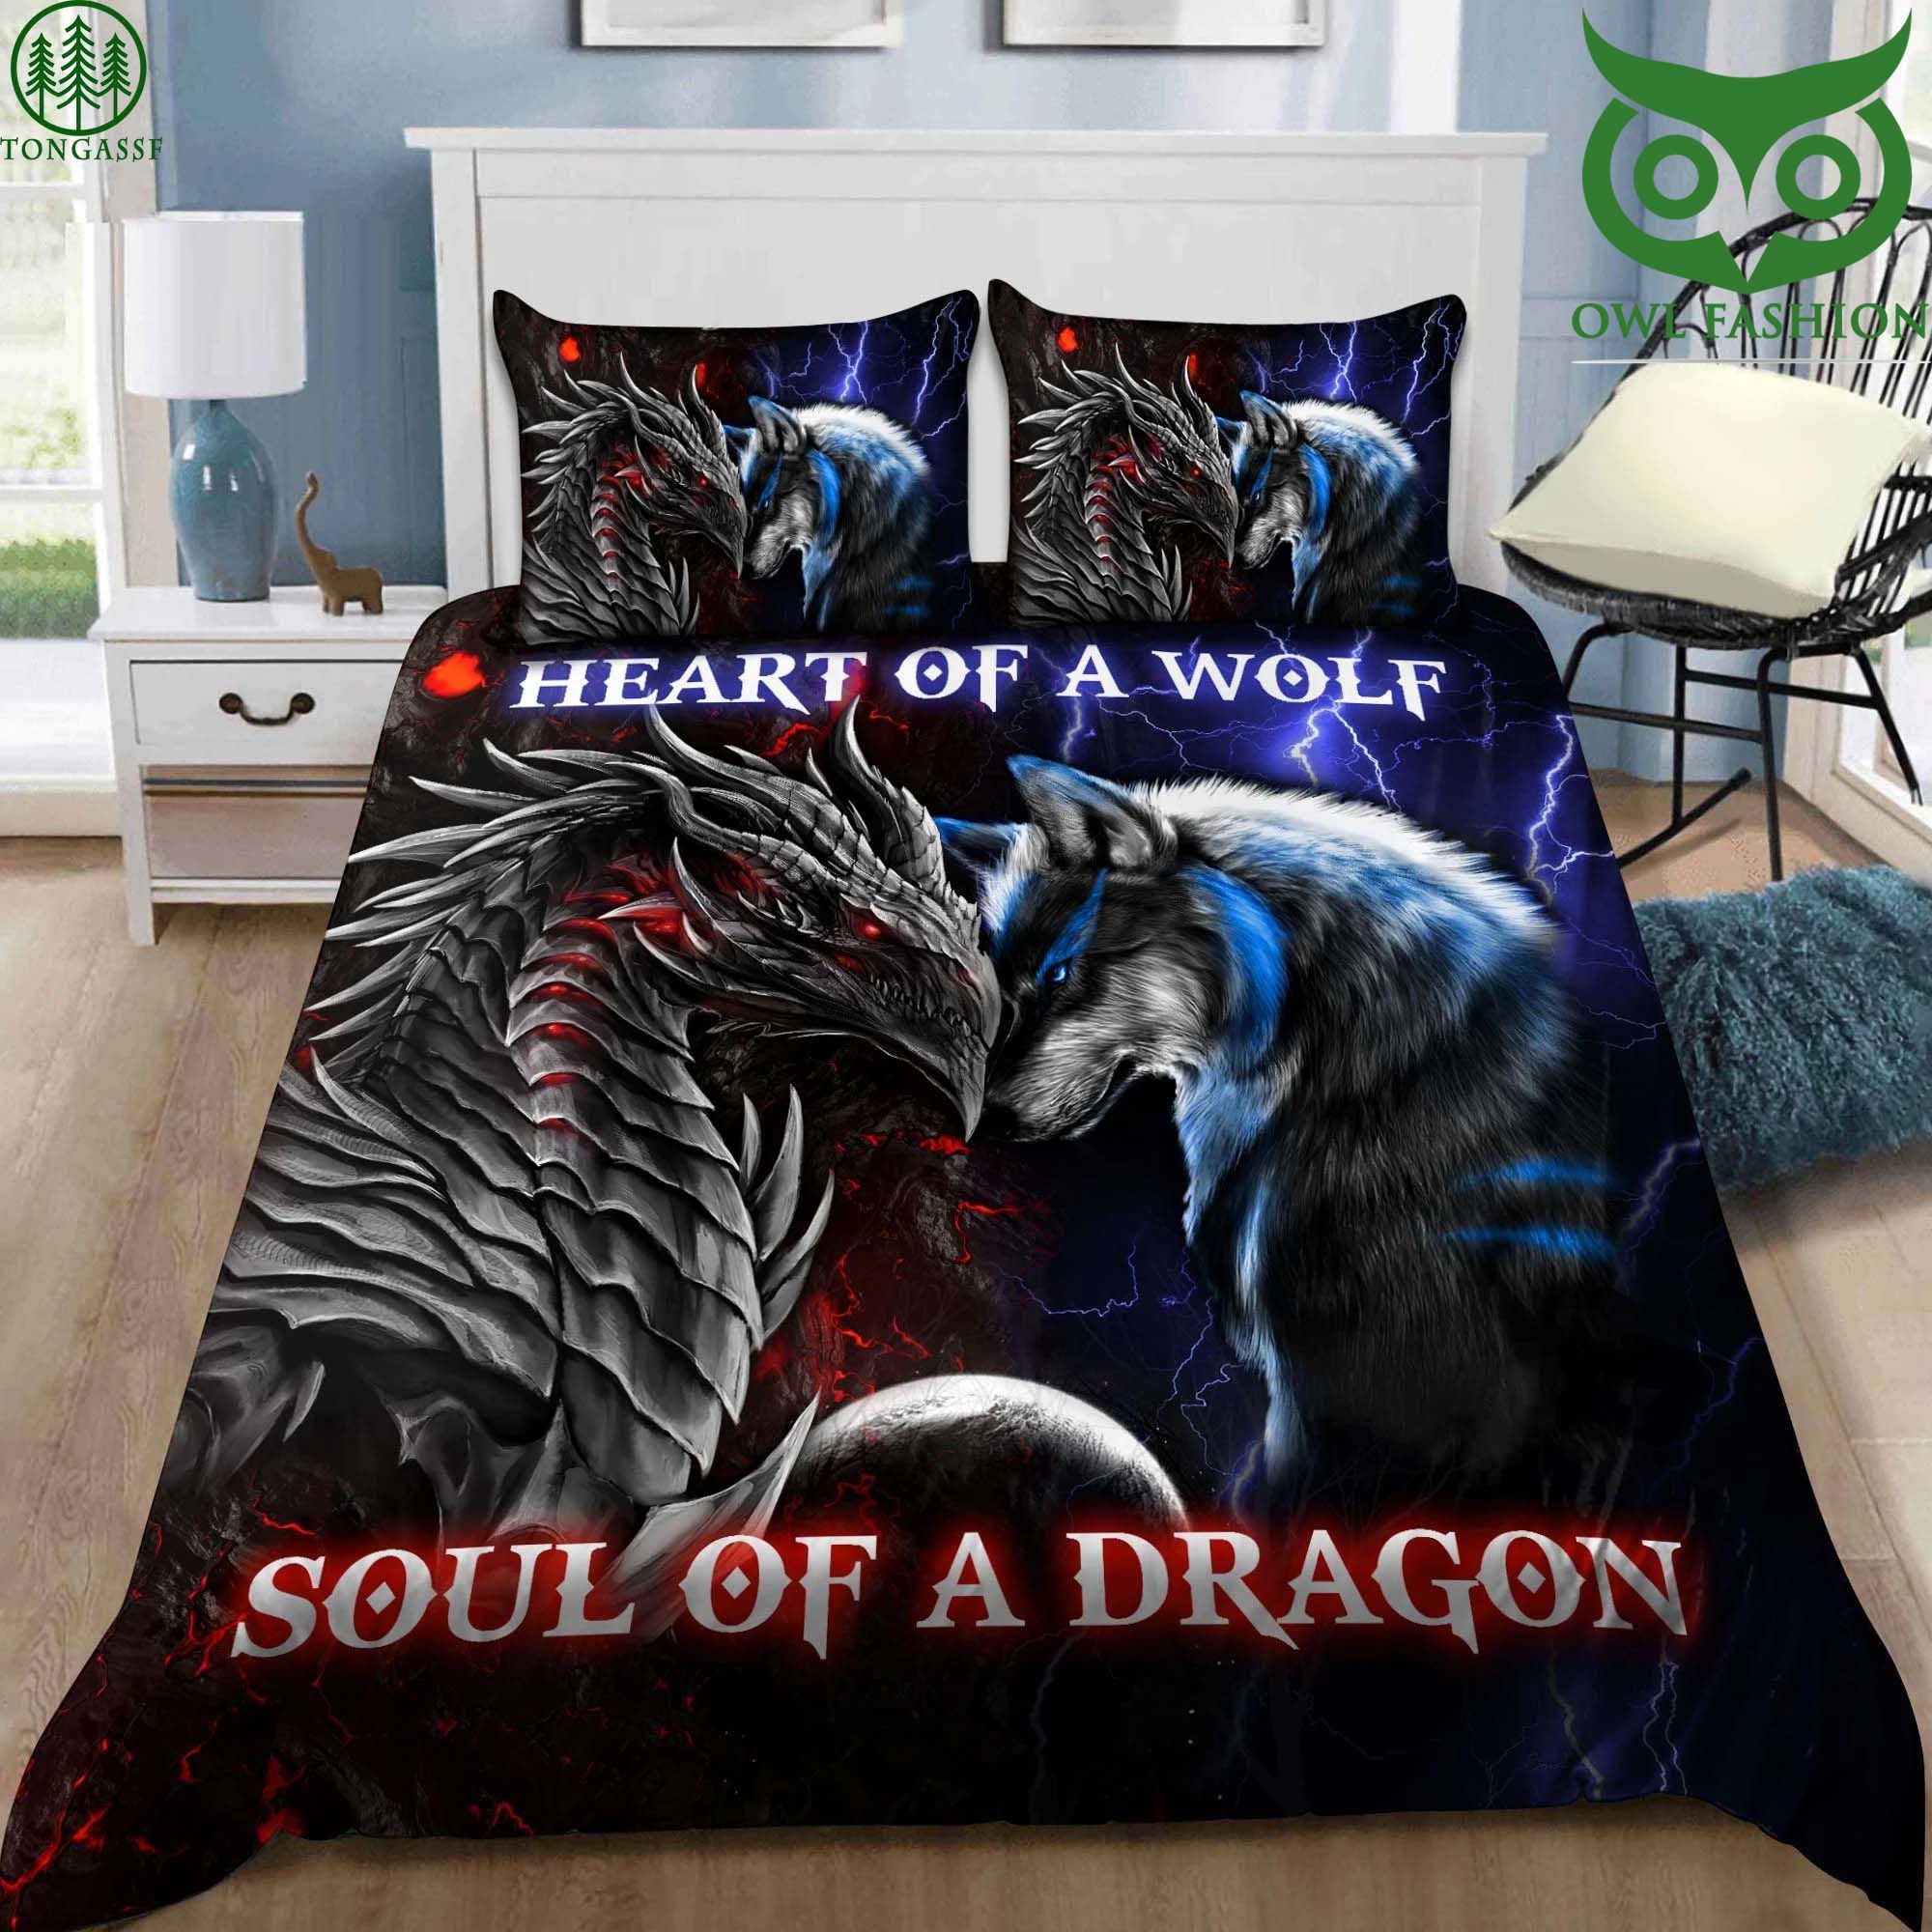 Battle of heart of a wolf and soul of a dragon bedding set